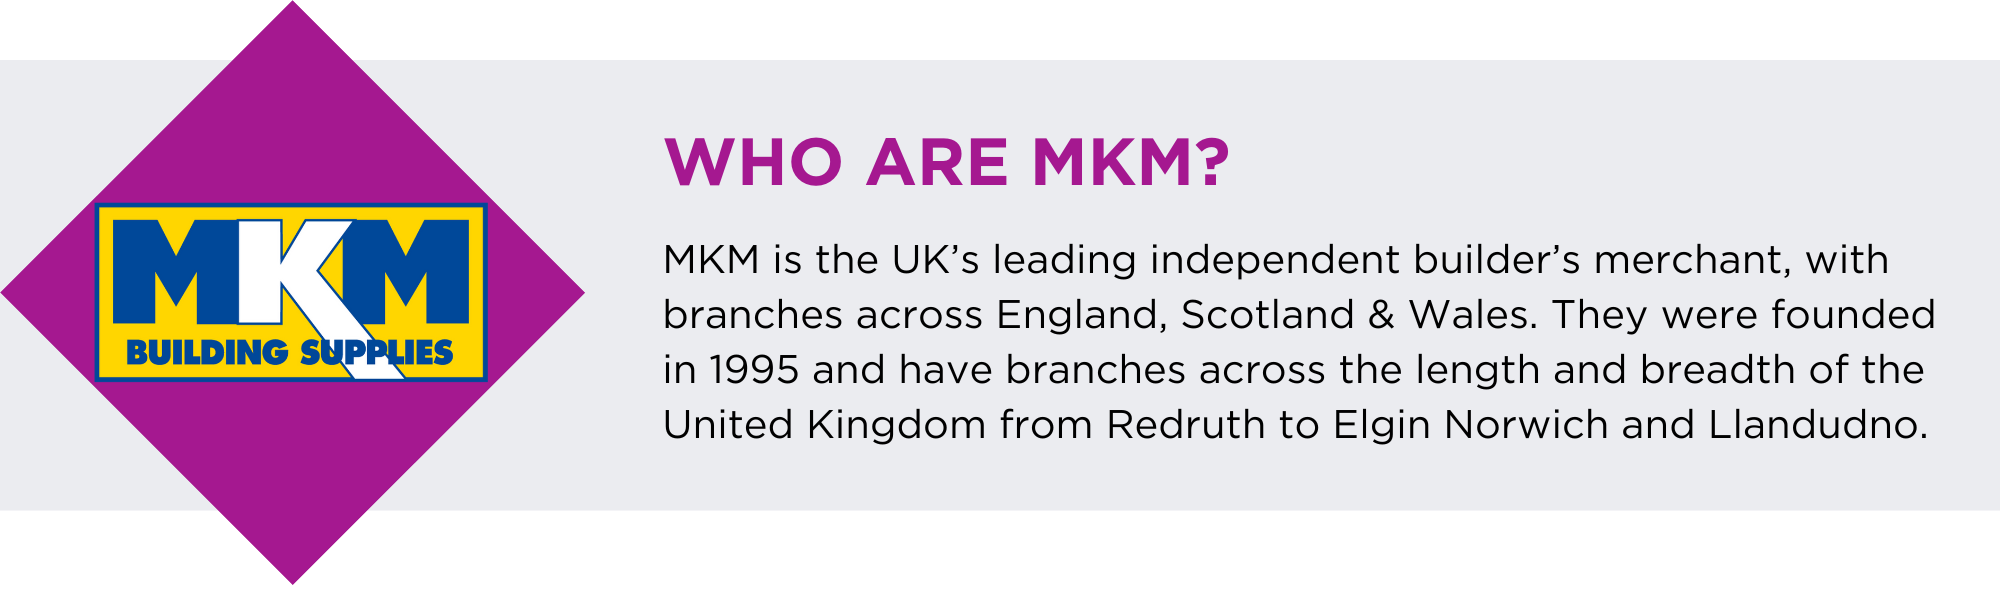 who are MKM